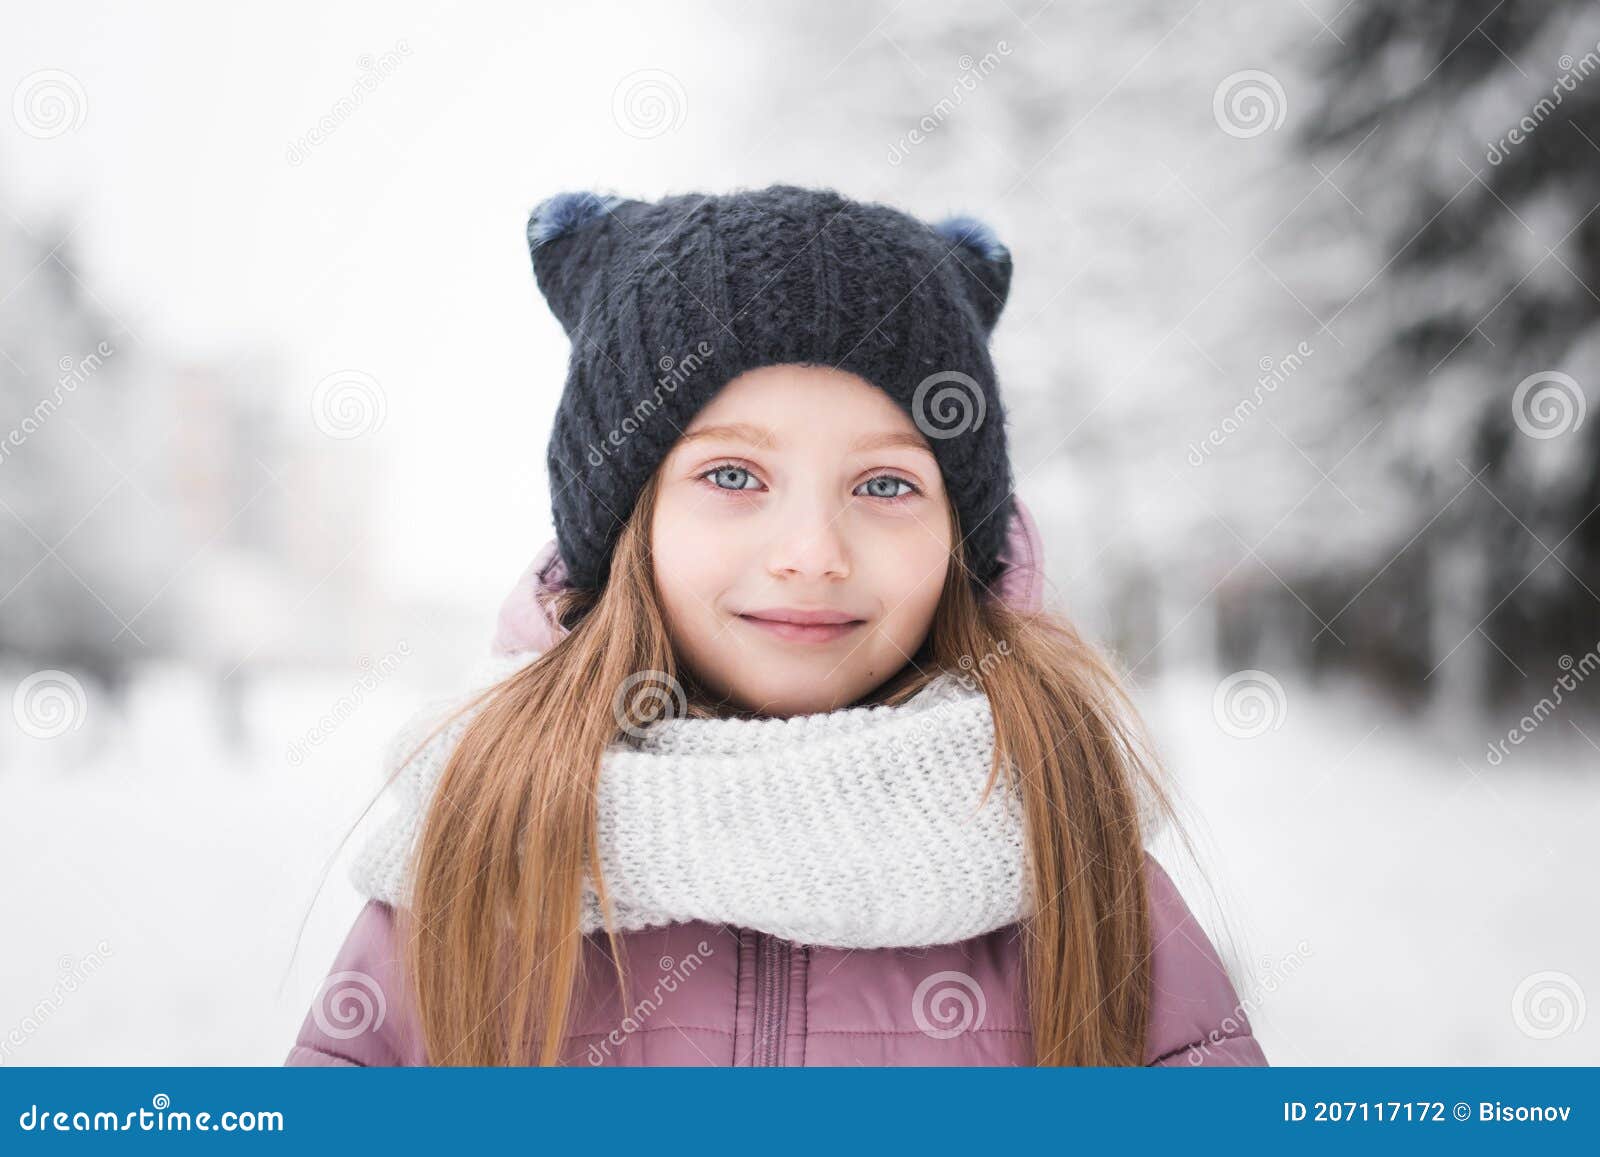 Beautiful Little Girl Five Years Old Portrait in a Snowy City Park ...